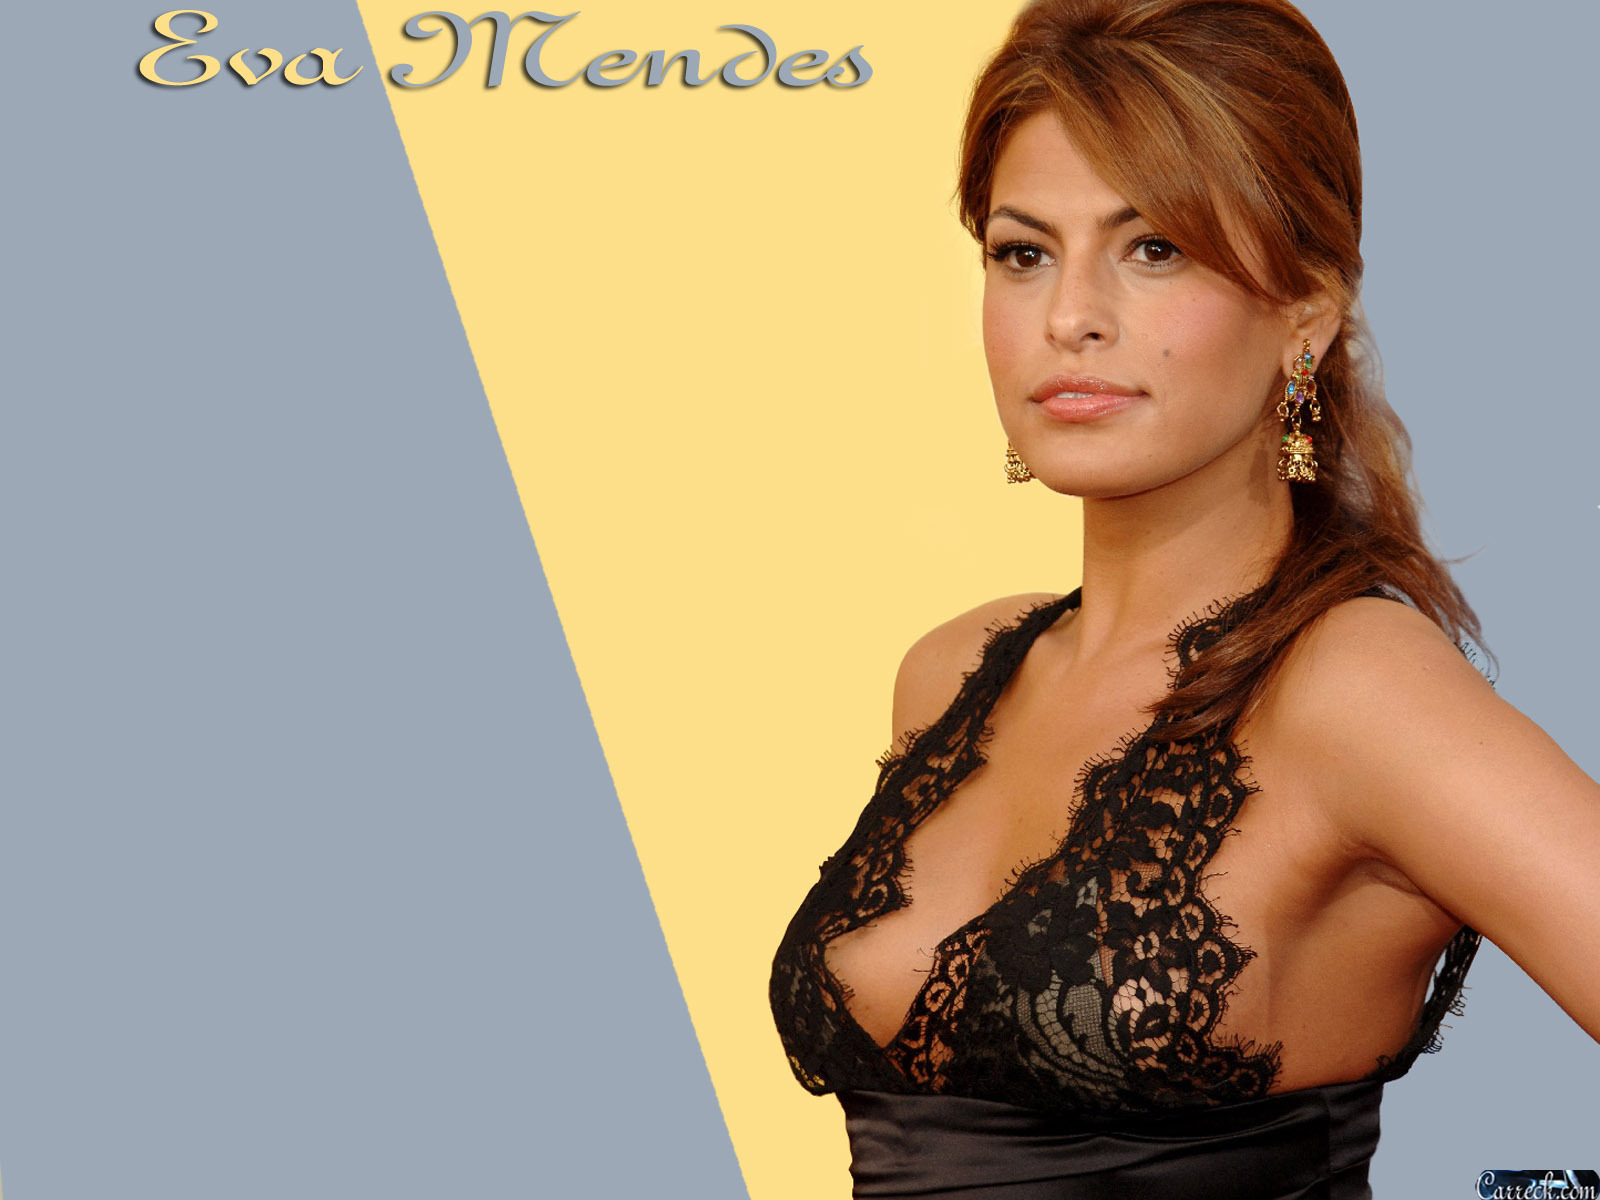 Eva Mendes Image HD Wallpaper And Background